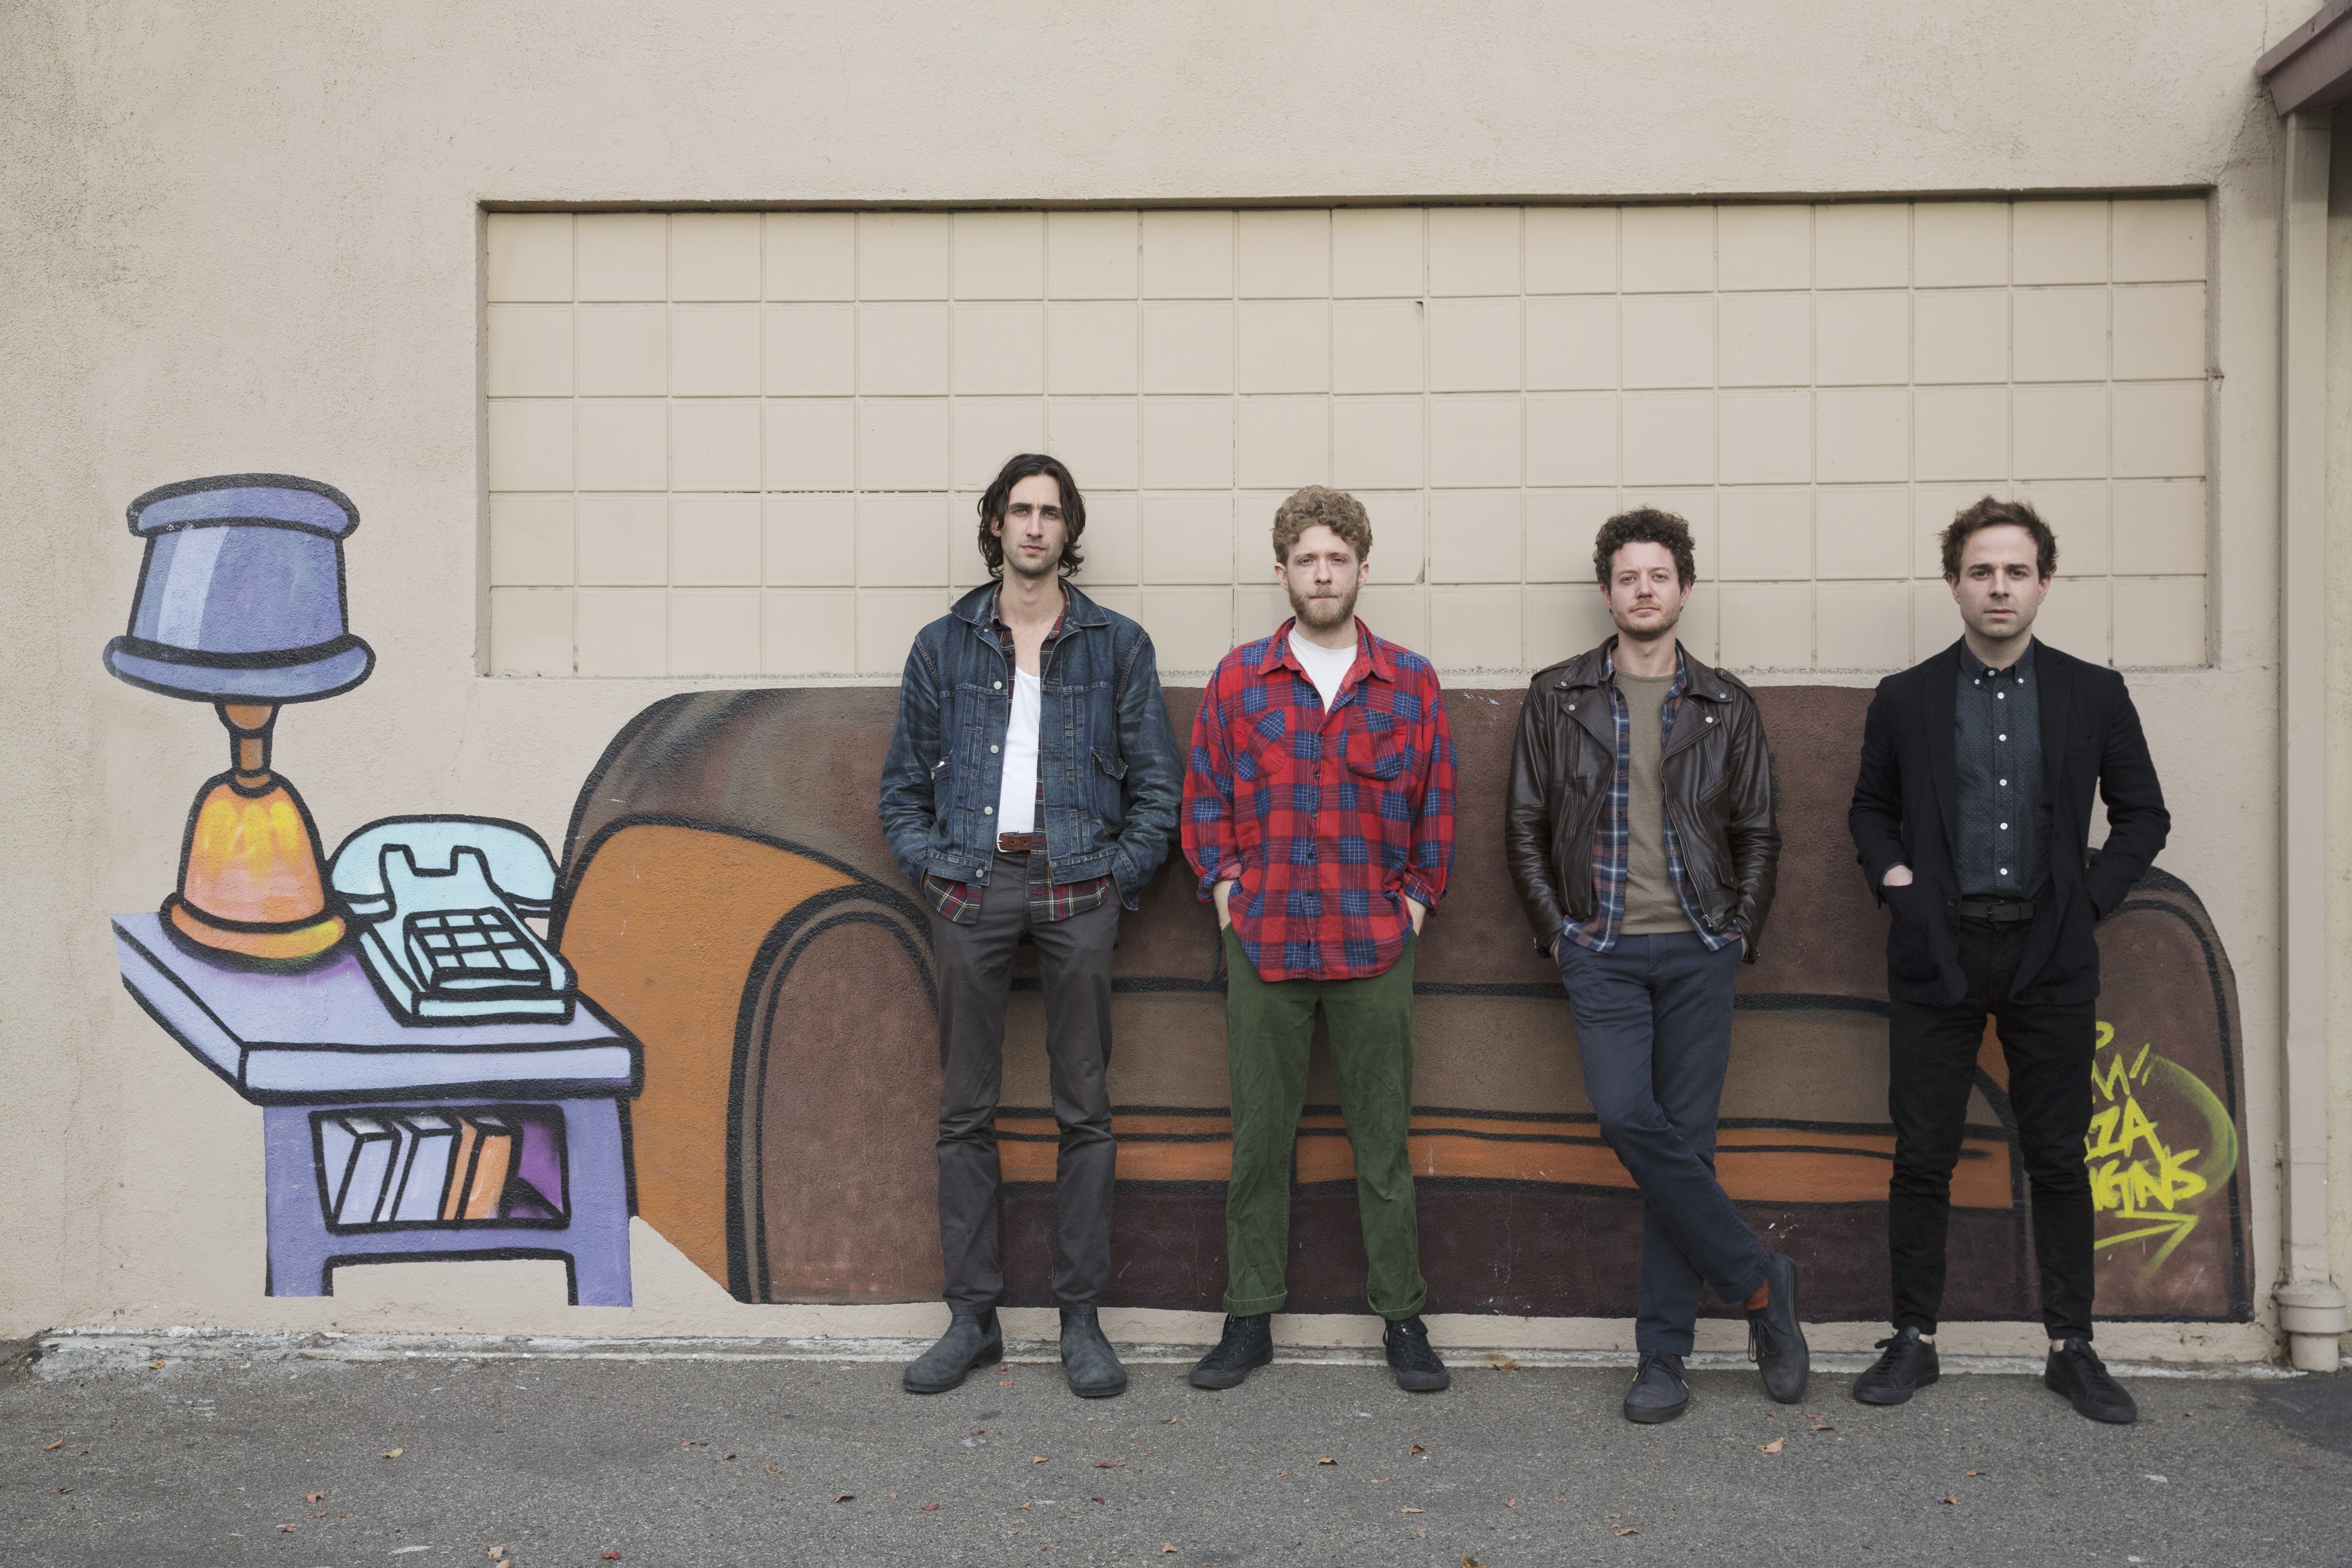 DAWES’ CALIFORNIA ROOTS ARE SHOWING, BUT IT’S NO NOSTALGIA ACT